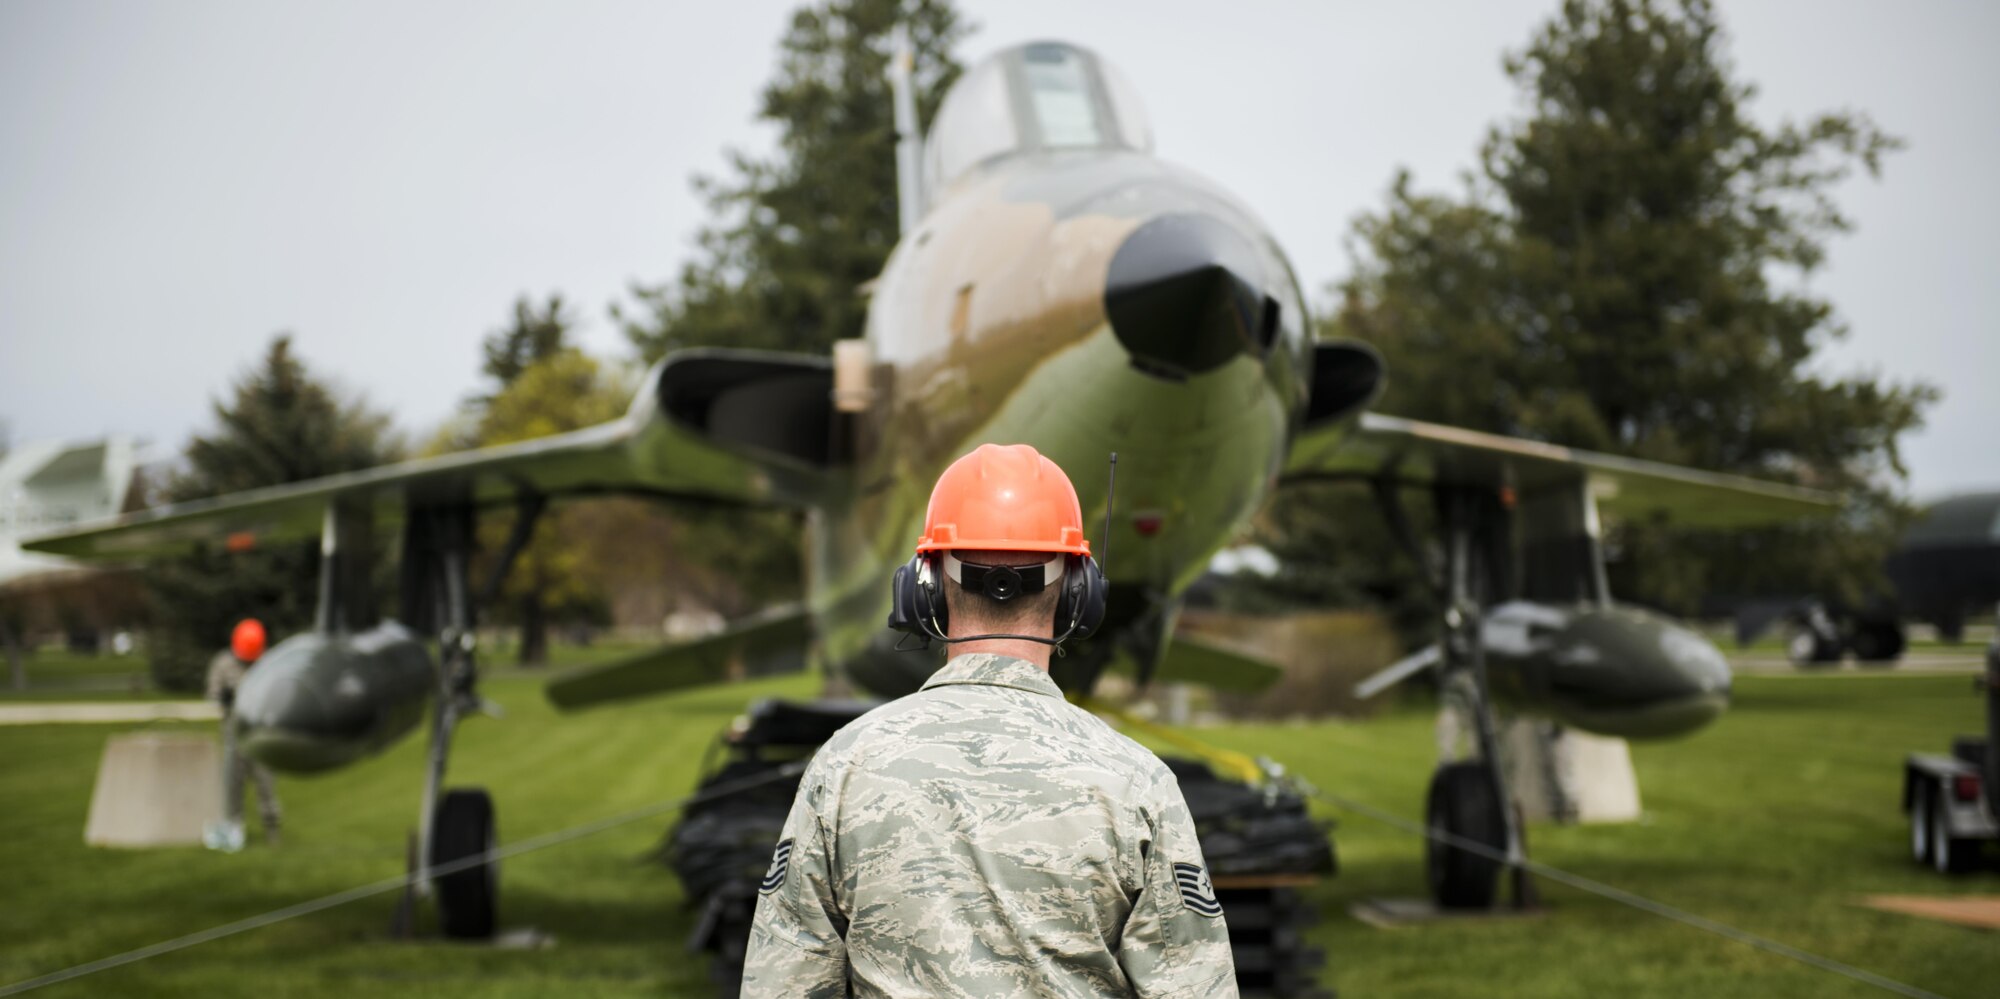 There are plans in place to have many repairs done to Fairchild’s Heritage Park, one of which is having the A-26 Invader repaired and repainted. There will also be volunteer opportunities in the works to get people out to the park to help with cleanup and other maintenance.  (U.S. Air Force photo/ Airman 1st Class Sean Campbell)